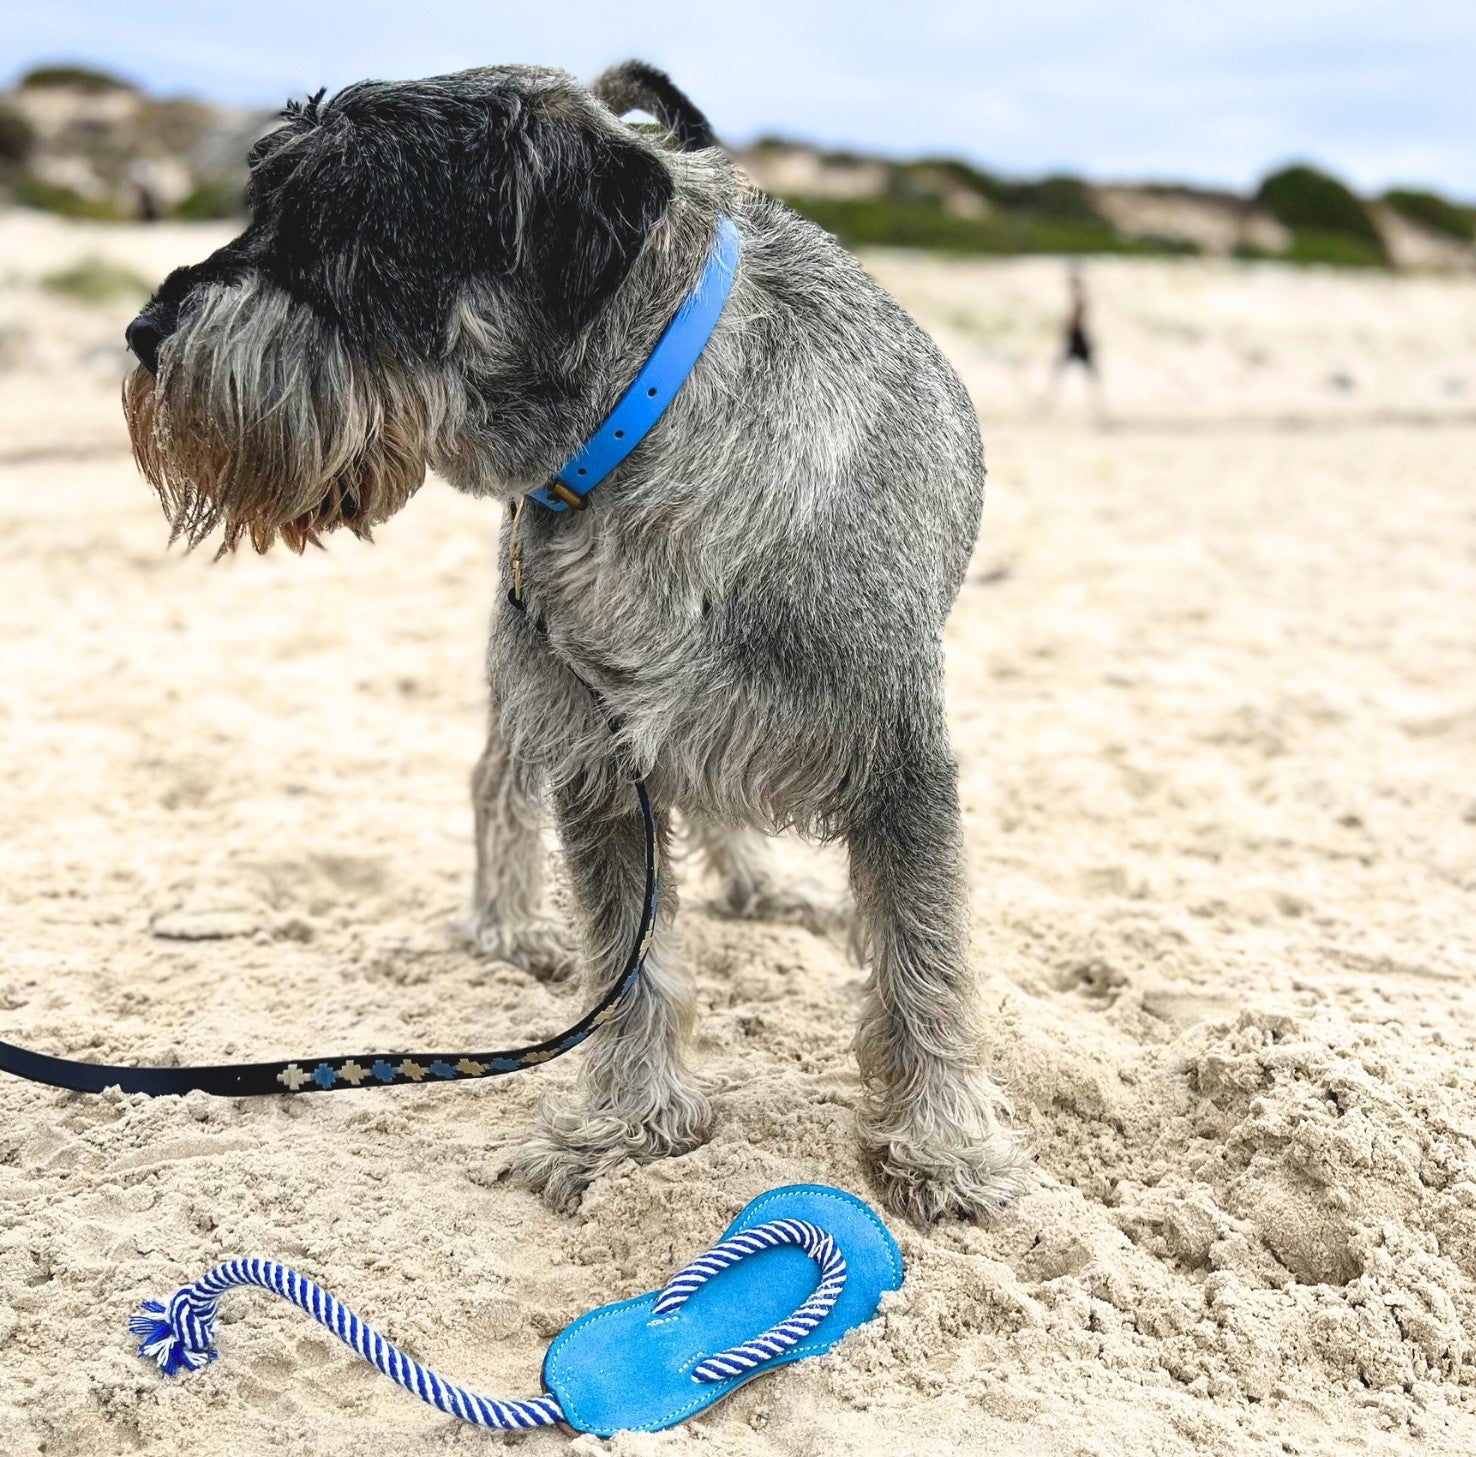 A schnauzer dog with a Georgie Paws hand-made Bald Collar Blue leather collar pauses on a sandy beach, gazing into the distance, with a blue and white rope toy at its feet and a leash trailing behind.